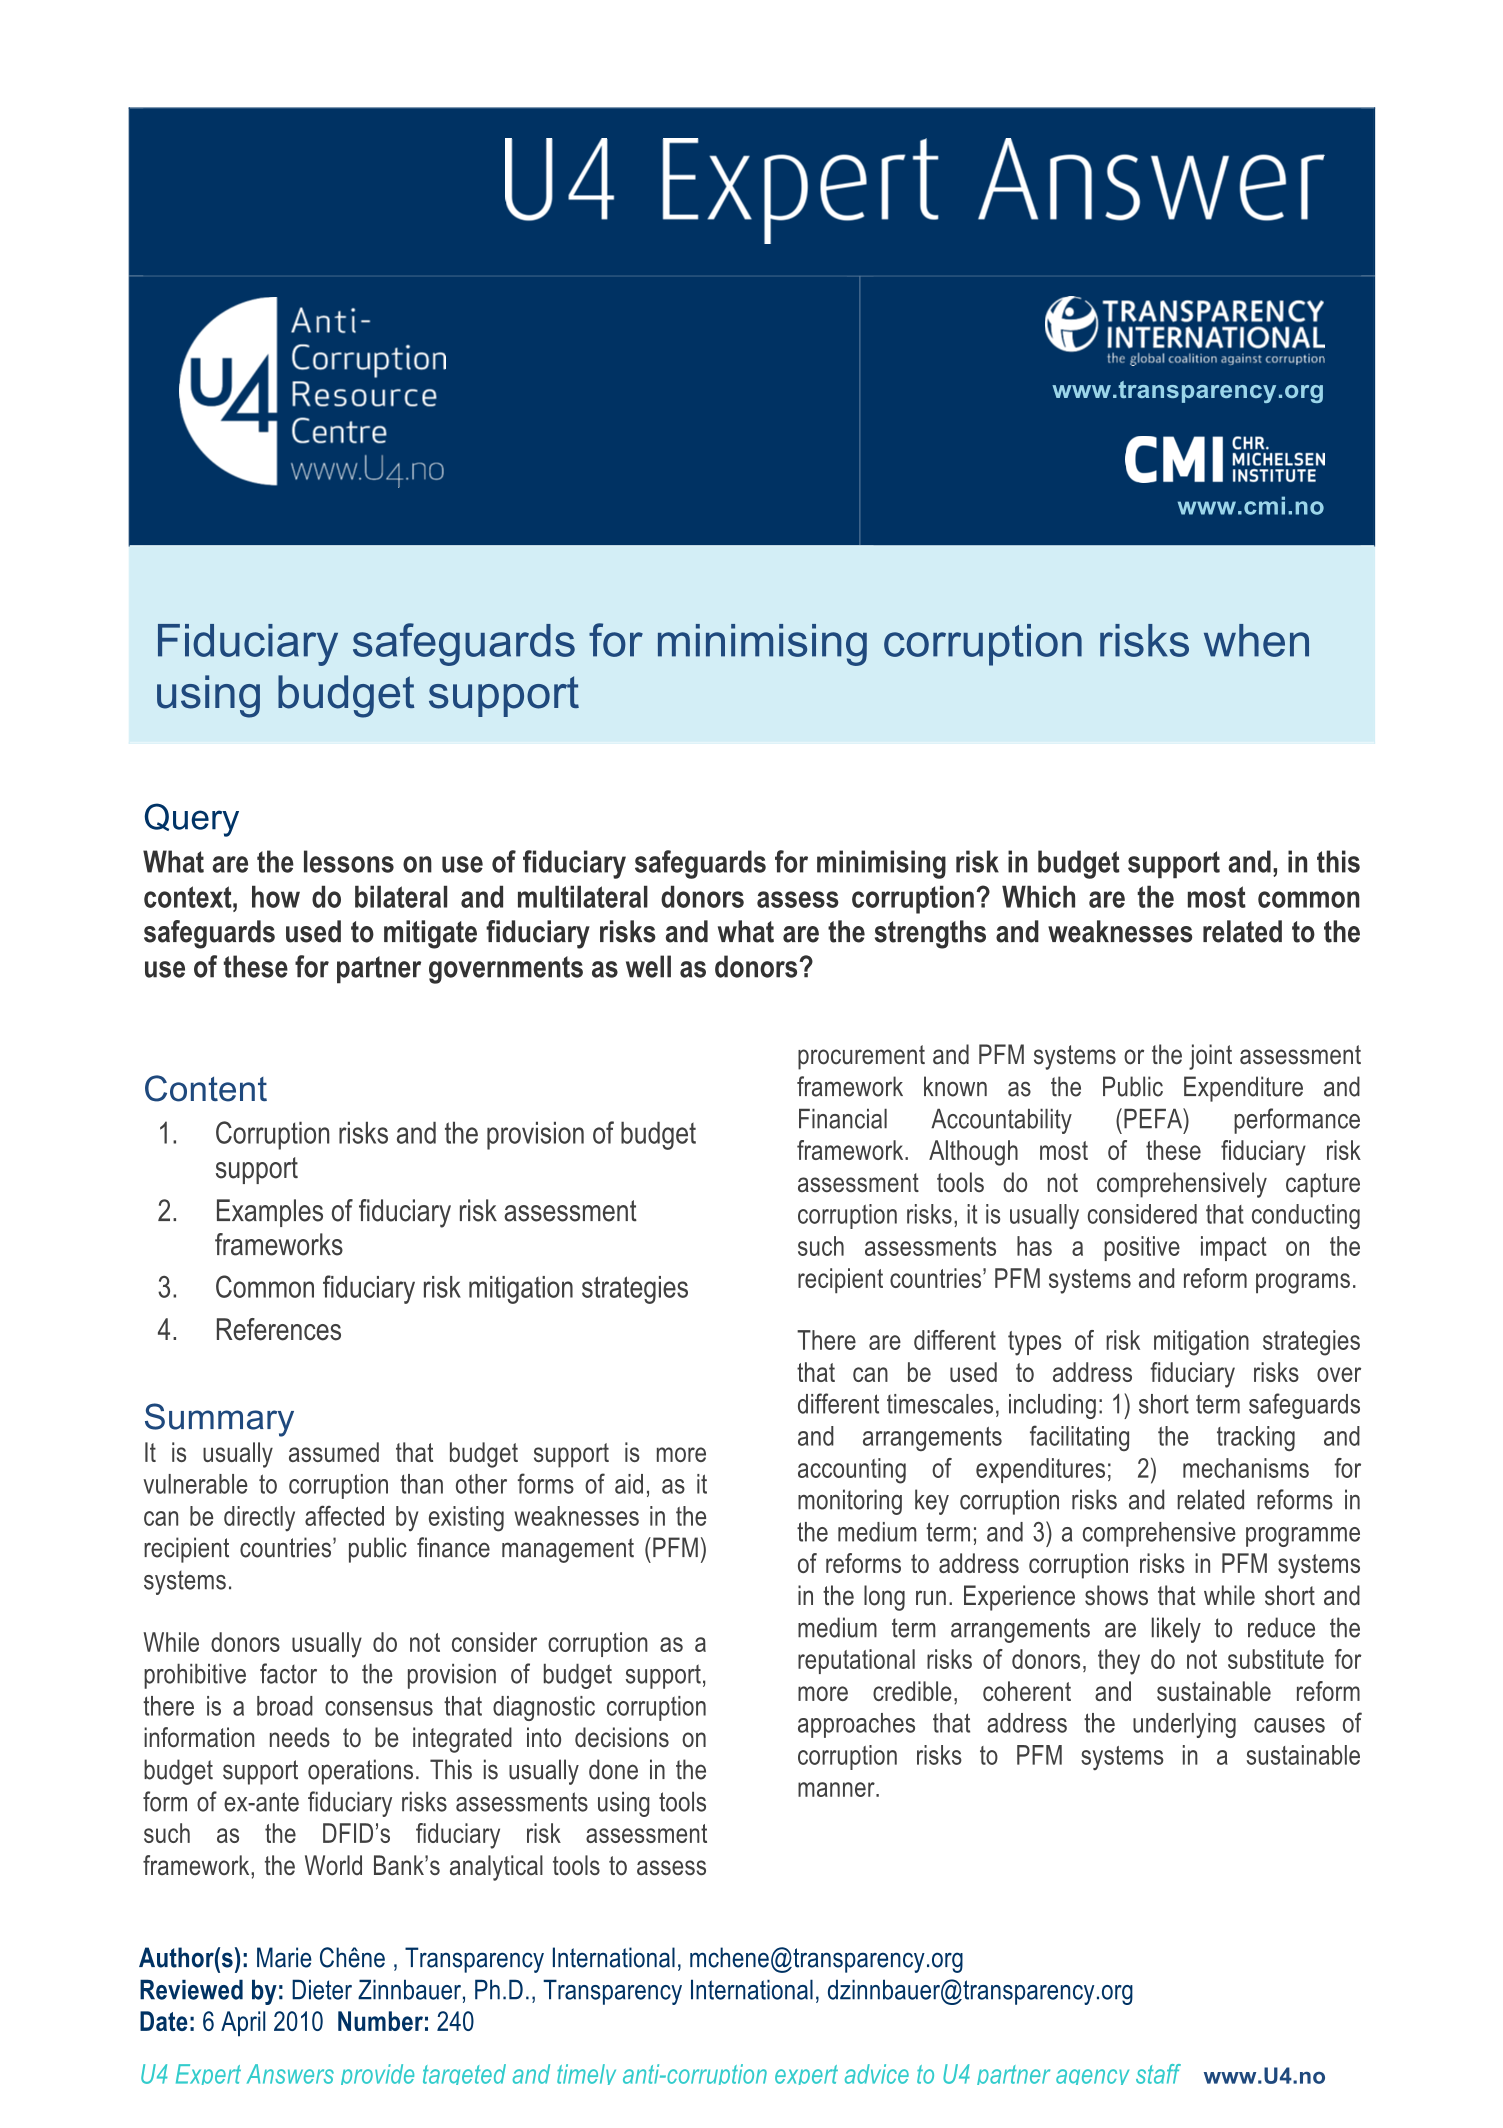 Fiduciary safeguards for minimising corruption risks when using budget support